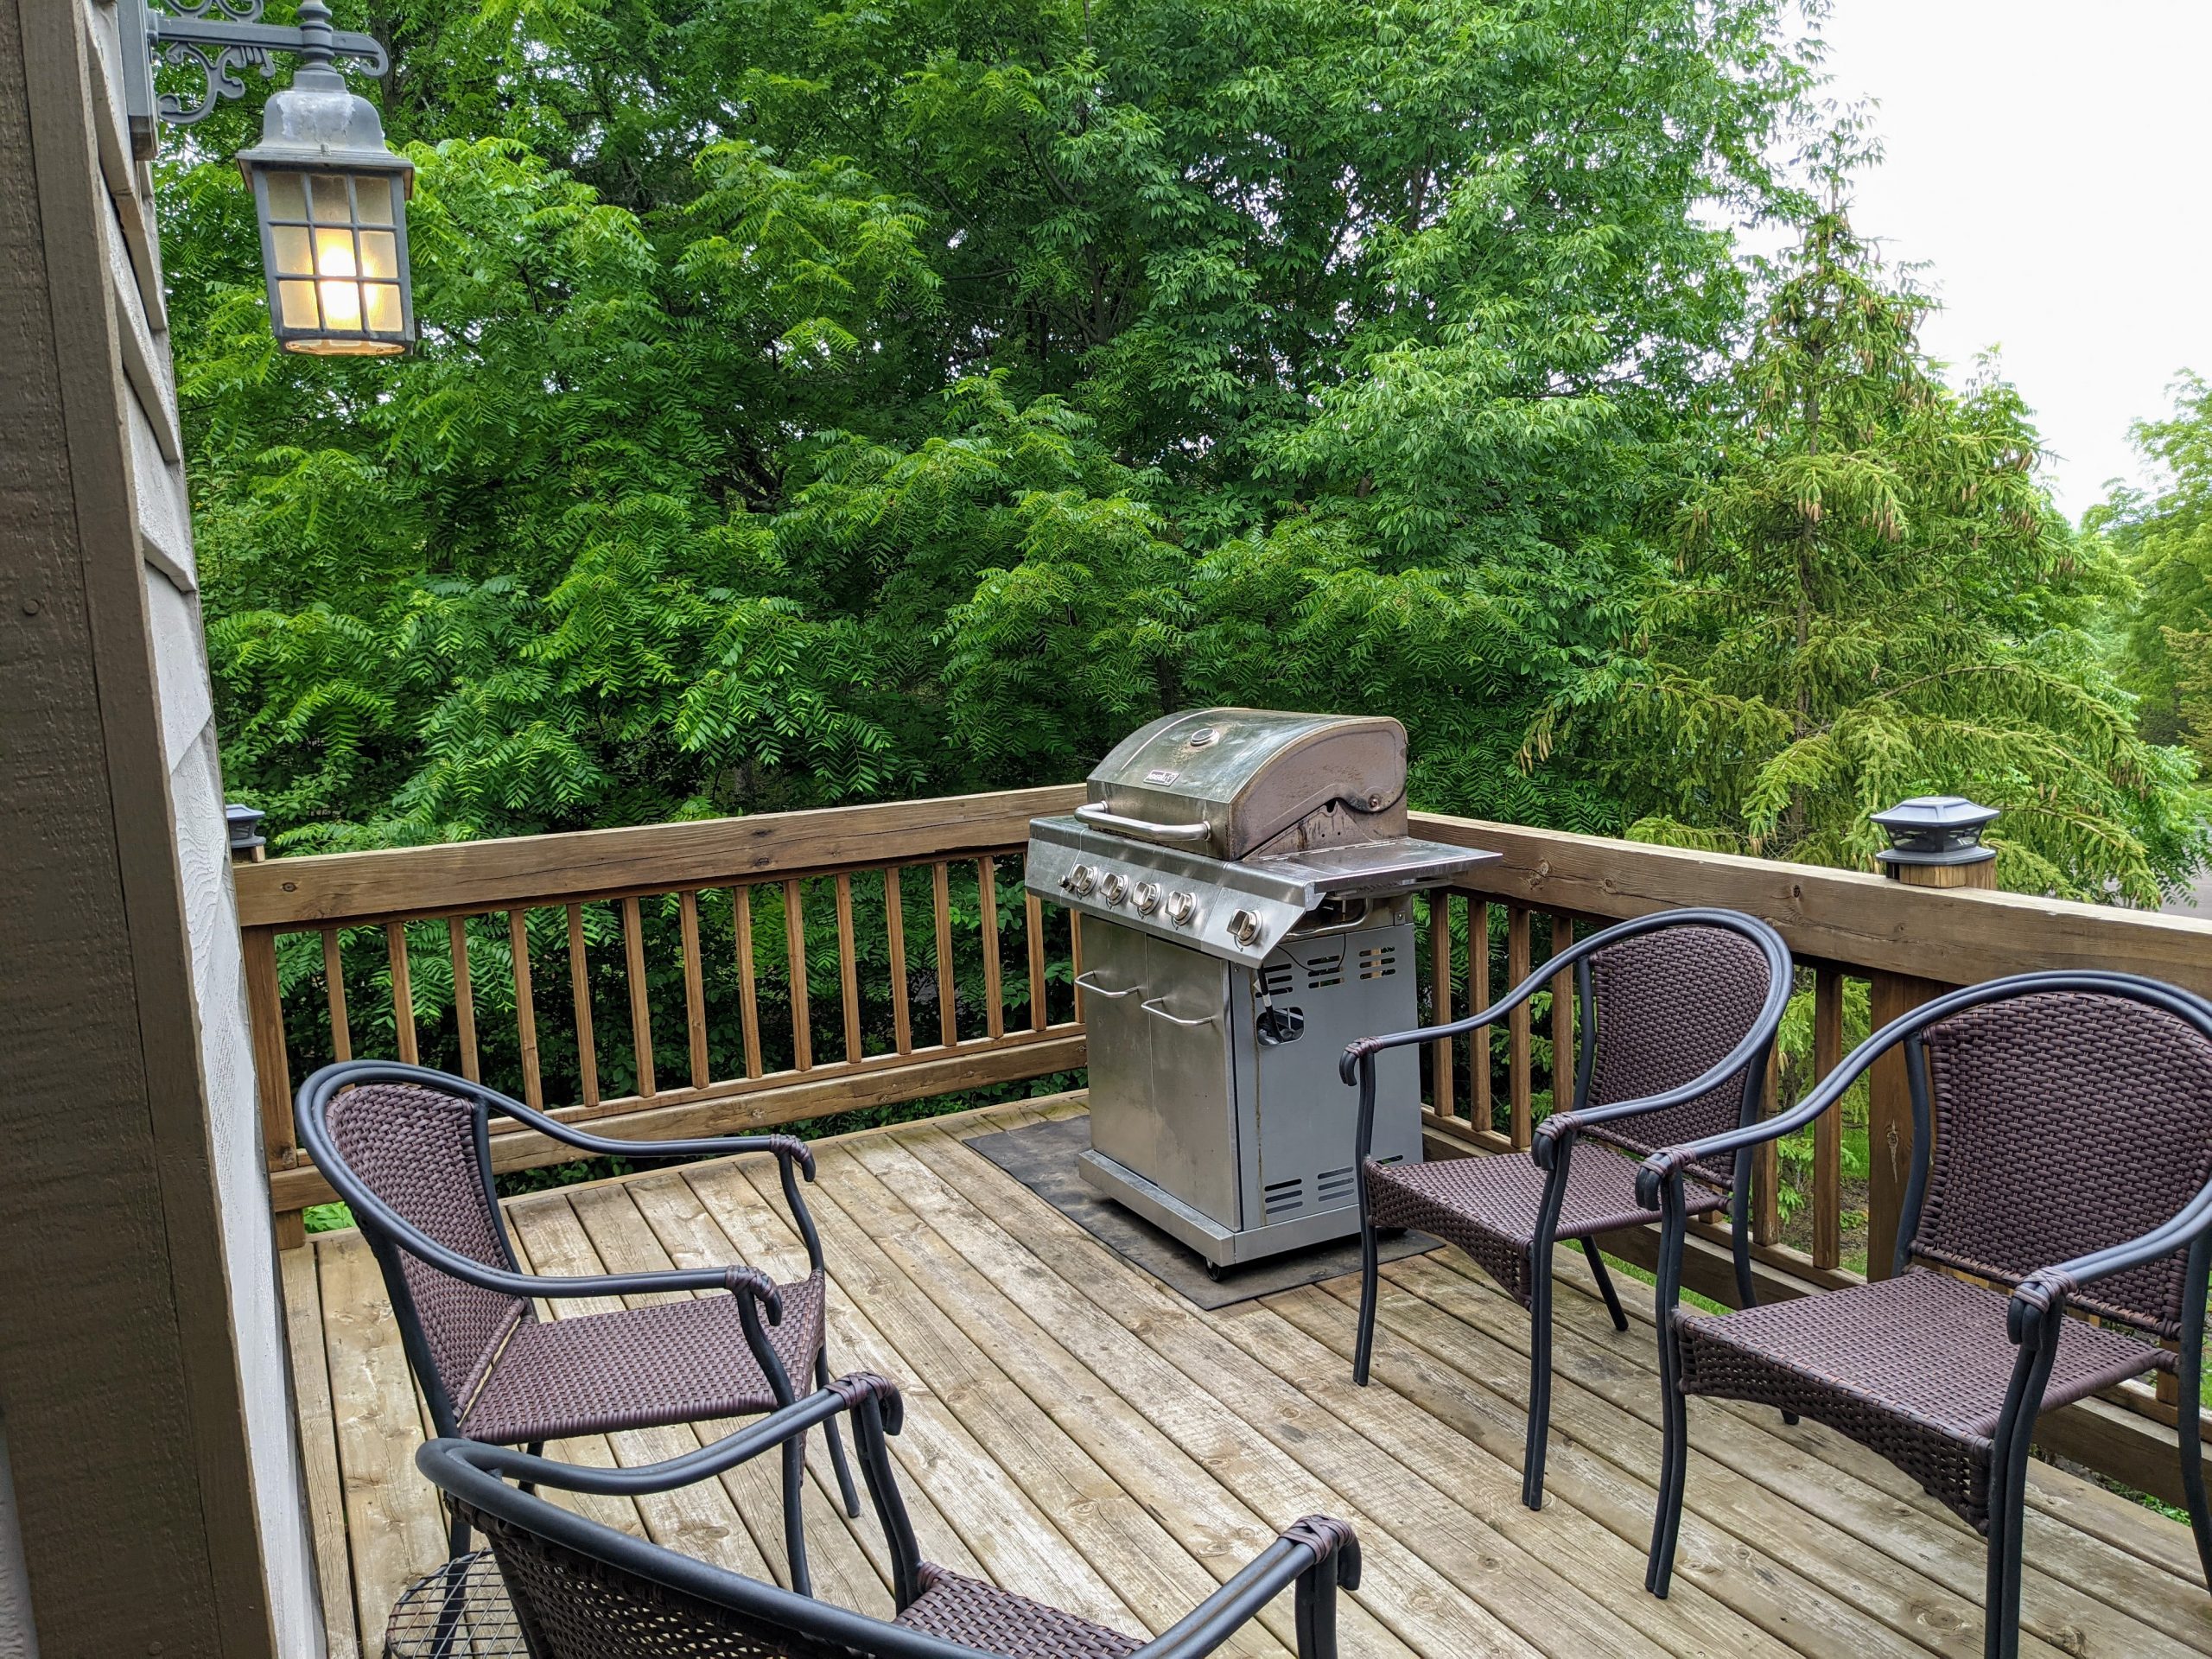 Deck and Grill Area